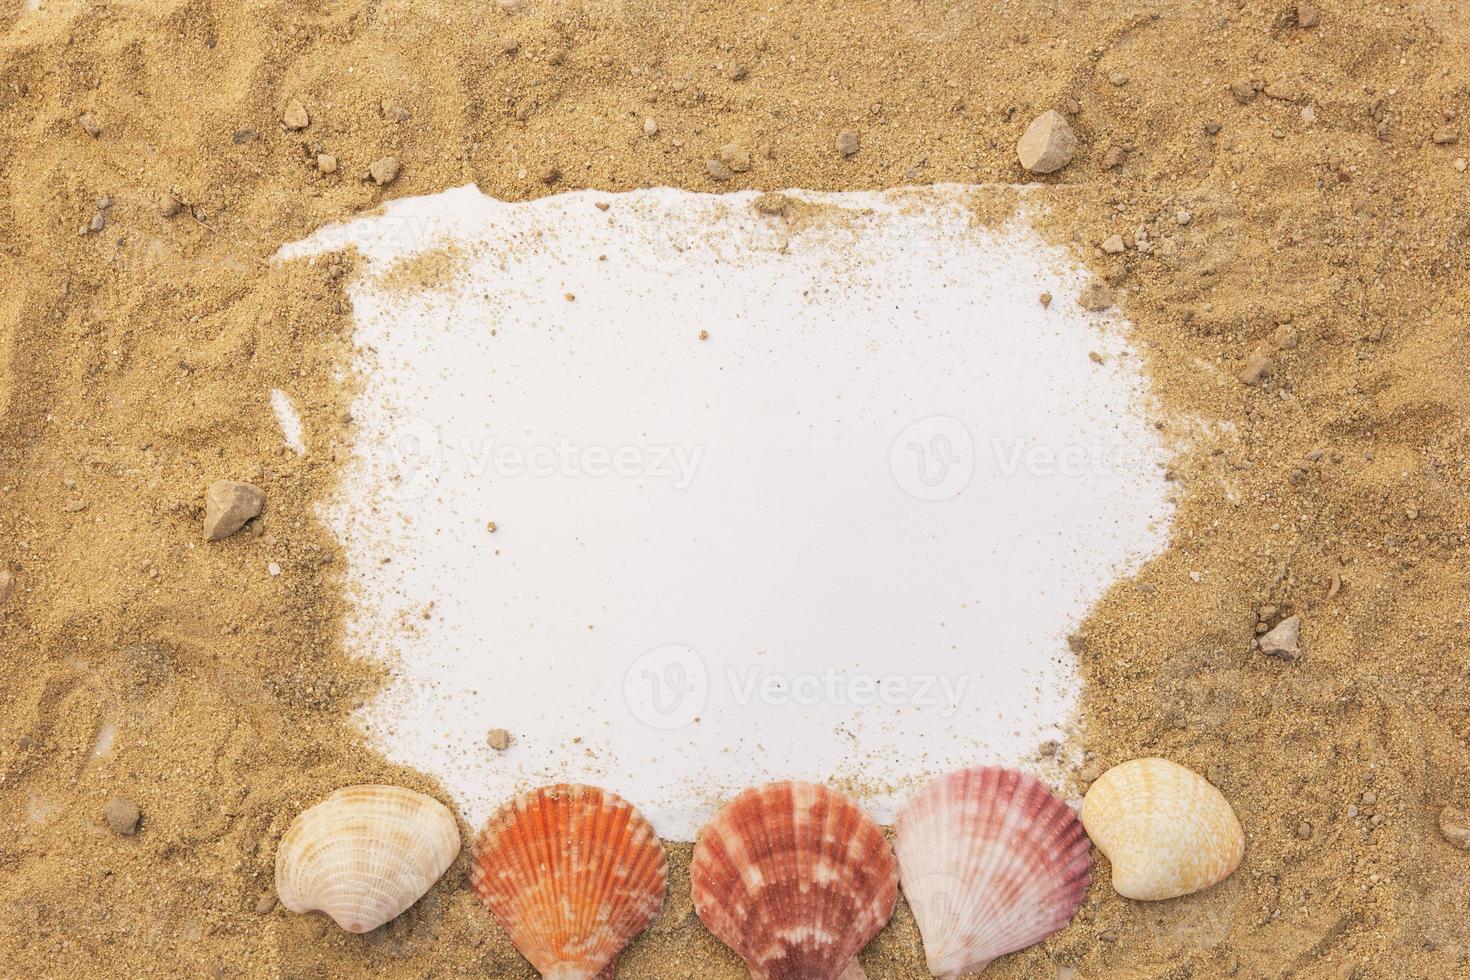 Blank paper concept for text with frames adorned with shells on a sandy background. photo